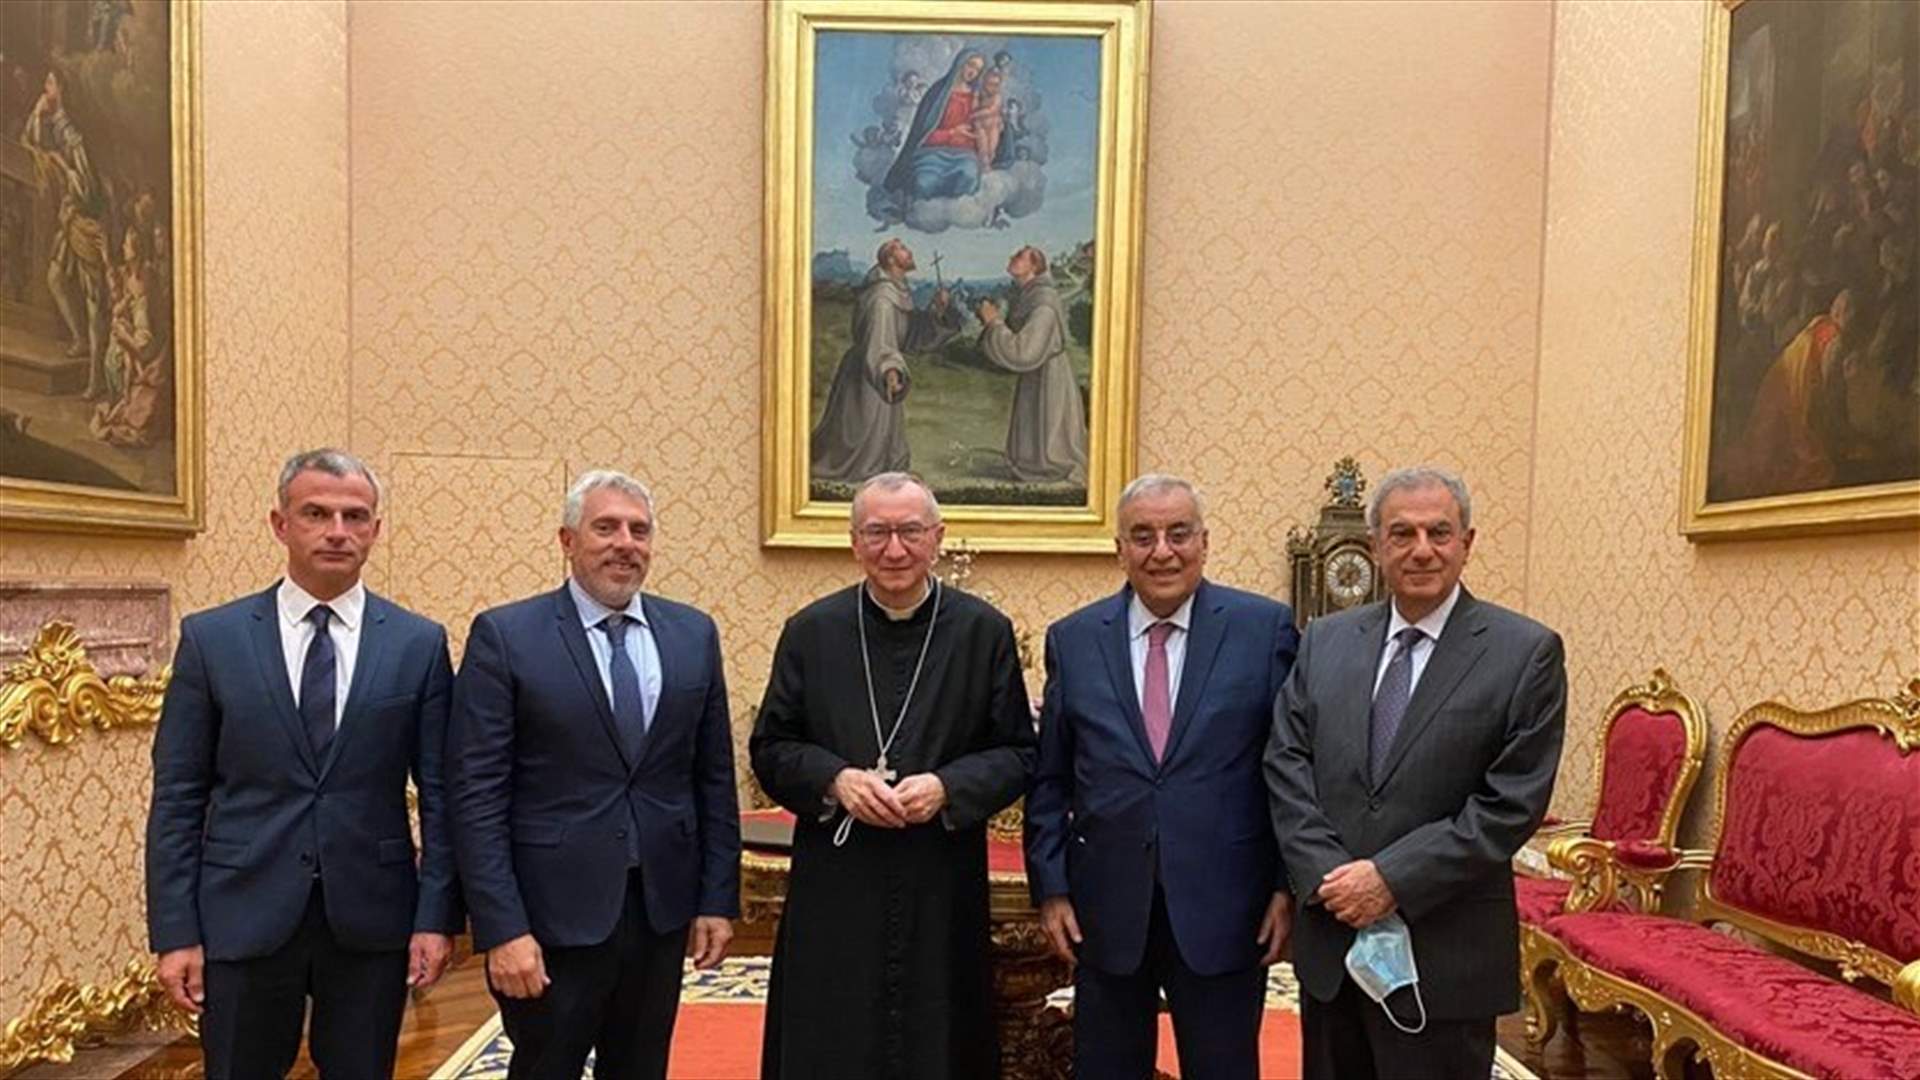 Minister Bou Habib kicks off official visit to the Vatican-[PHOTOS]